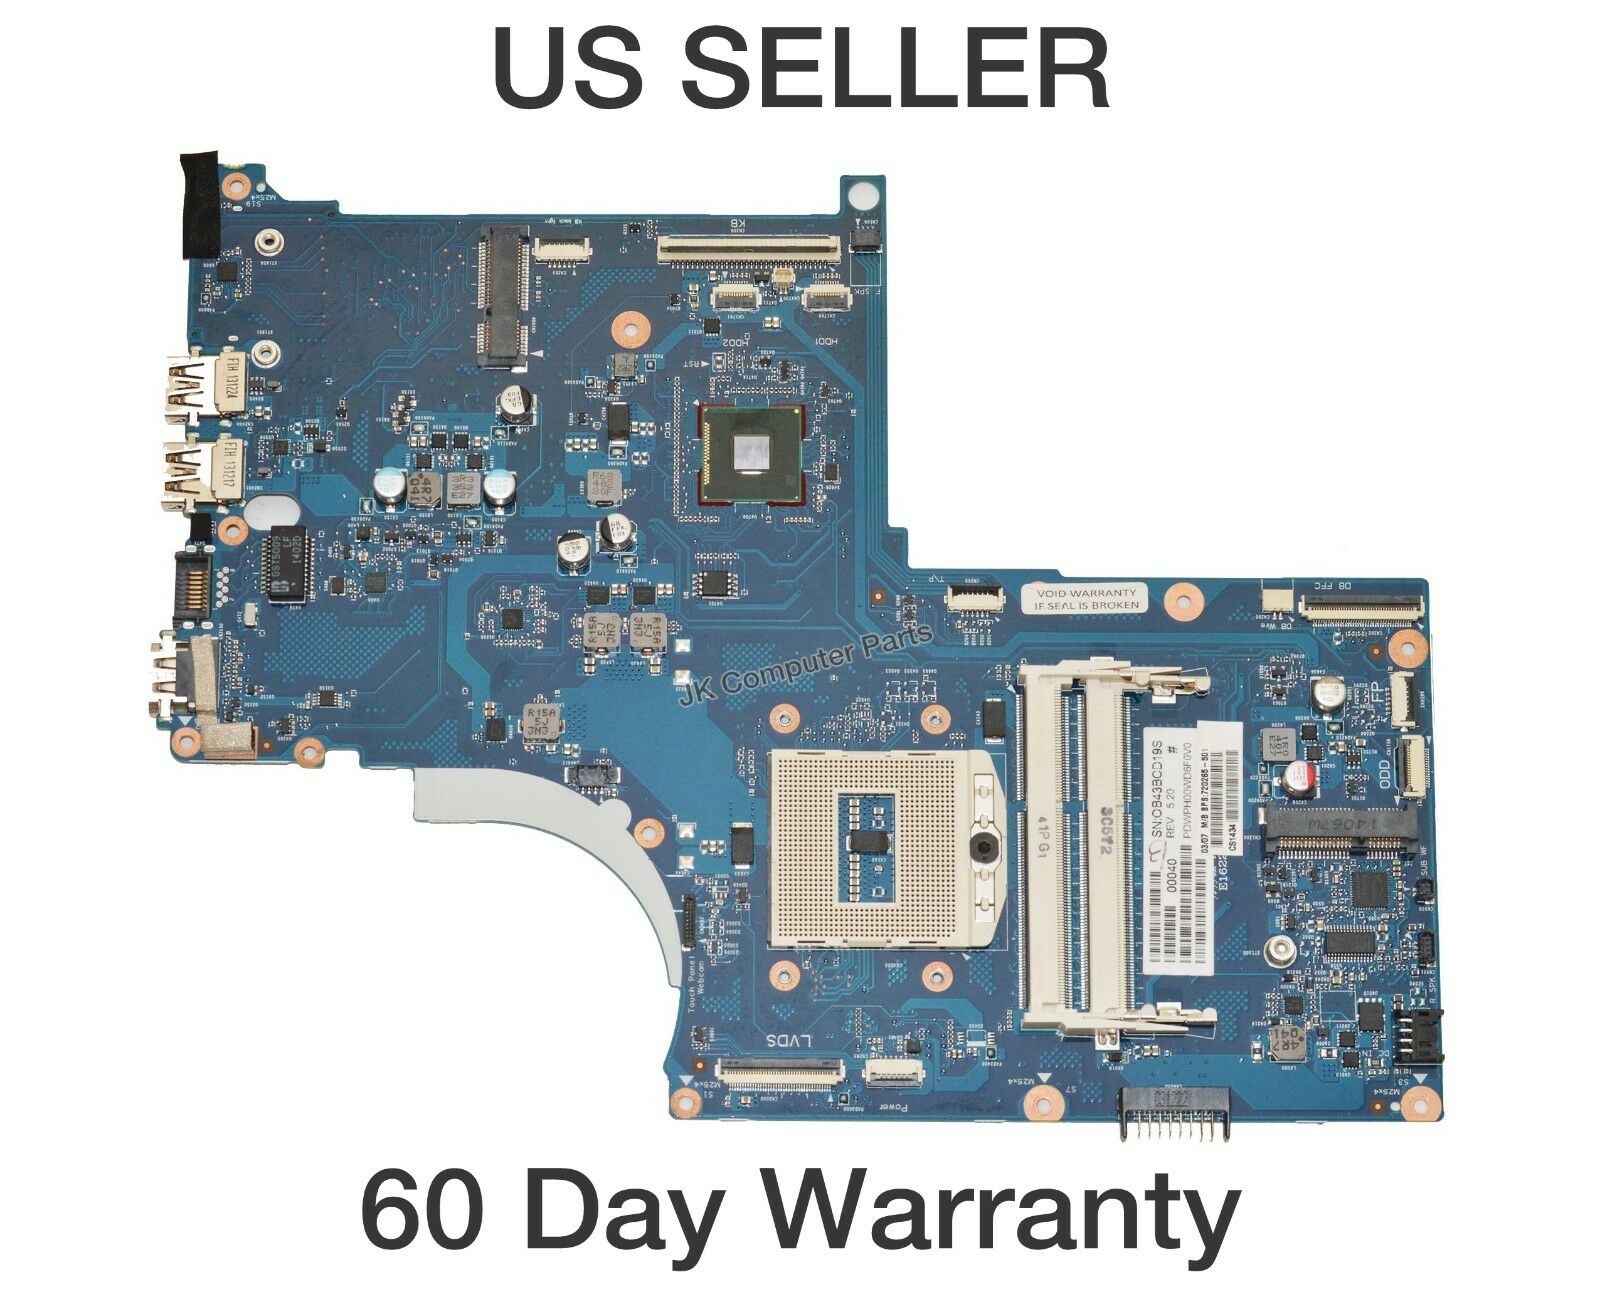 HP Envy M7-J Intel Laptop Motherboard s947 6050A2549501-MB-A02 HP Envy M7-J. This motherboard is pulled fro